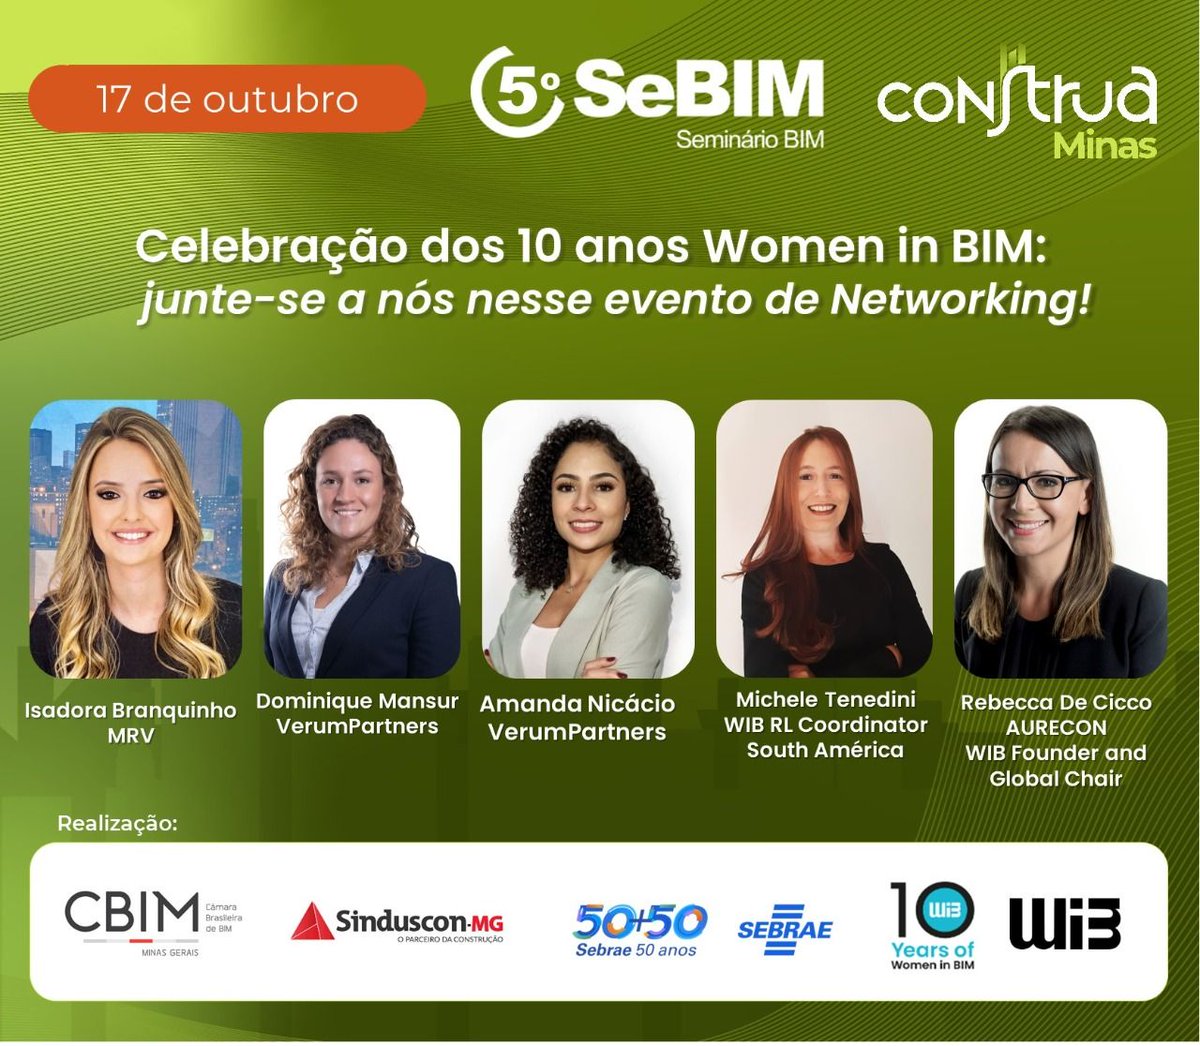 Please join us in Belo Horizonte, Brazil at the event Construa Minas to help celebrate the WIB 10 year anniversary. This hybrid event will include WIB representation on Day 1, October 17 from @becdecicco @mitnedni and our WIB Regional Leads in Brazil. construaminas.org.br